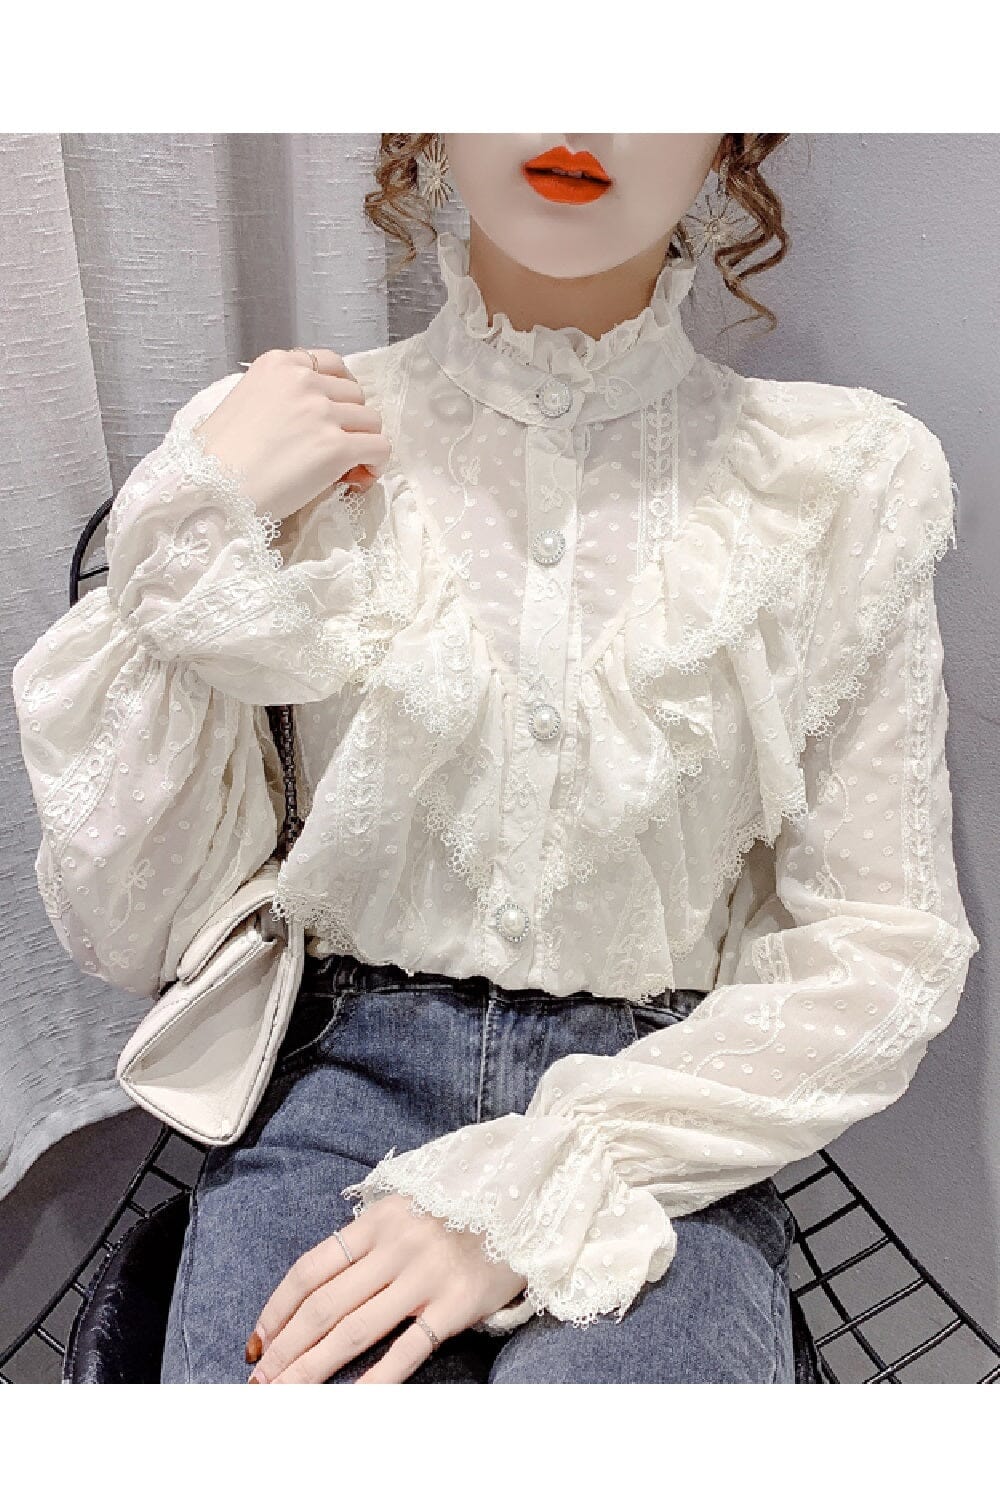 Women Elegant Ruffle Stitching Lace Casual Chiffon Stand Collar Victorian Long Sleeve Button Down Blouse Tops_ jehouze White S 